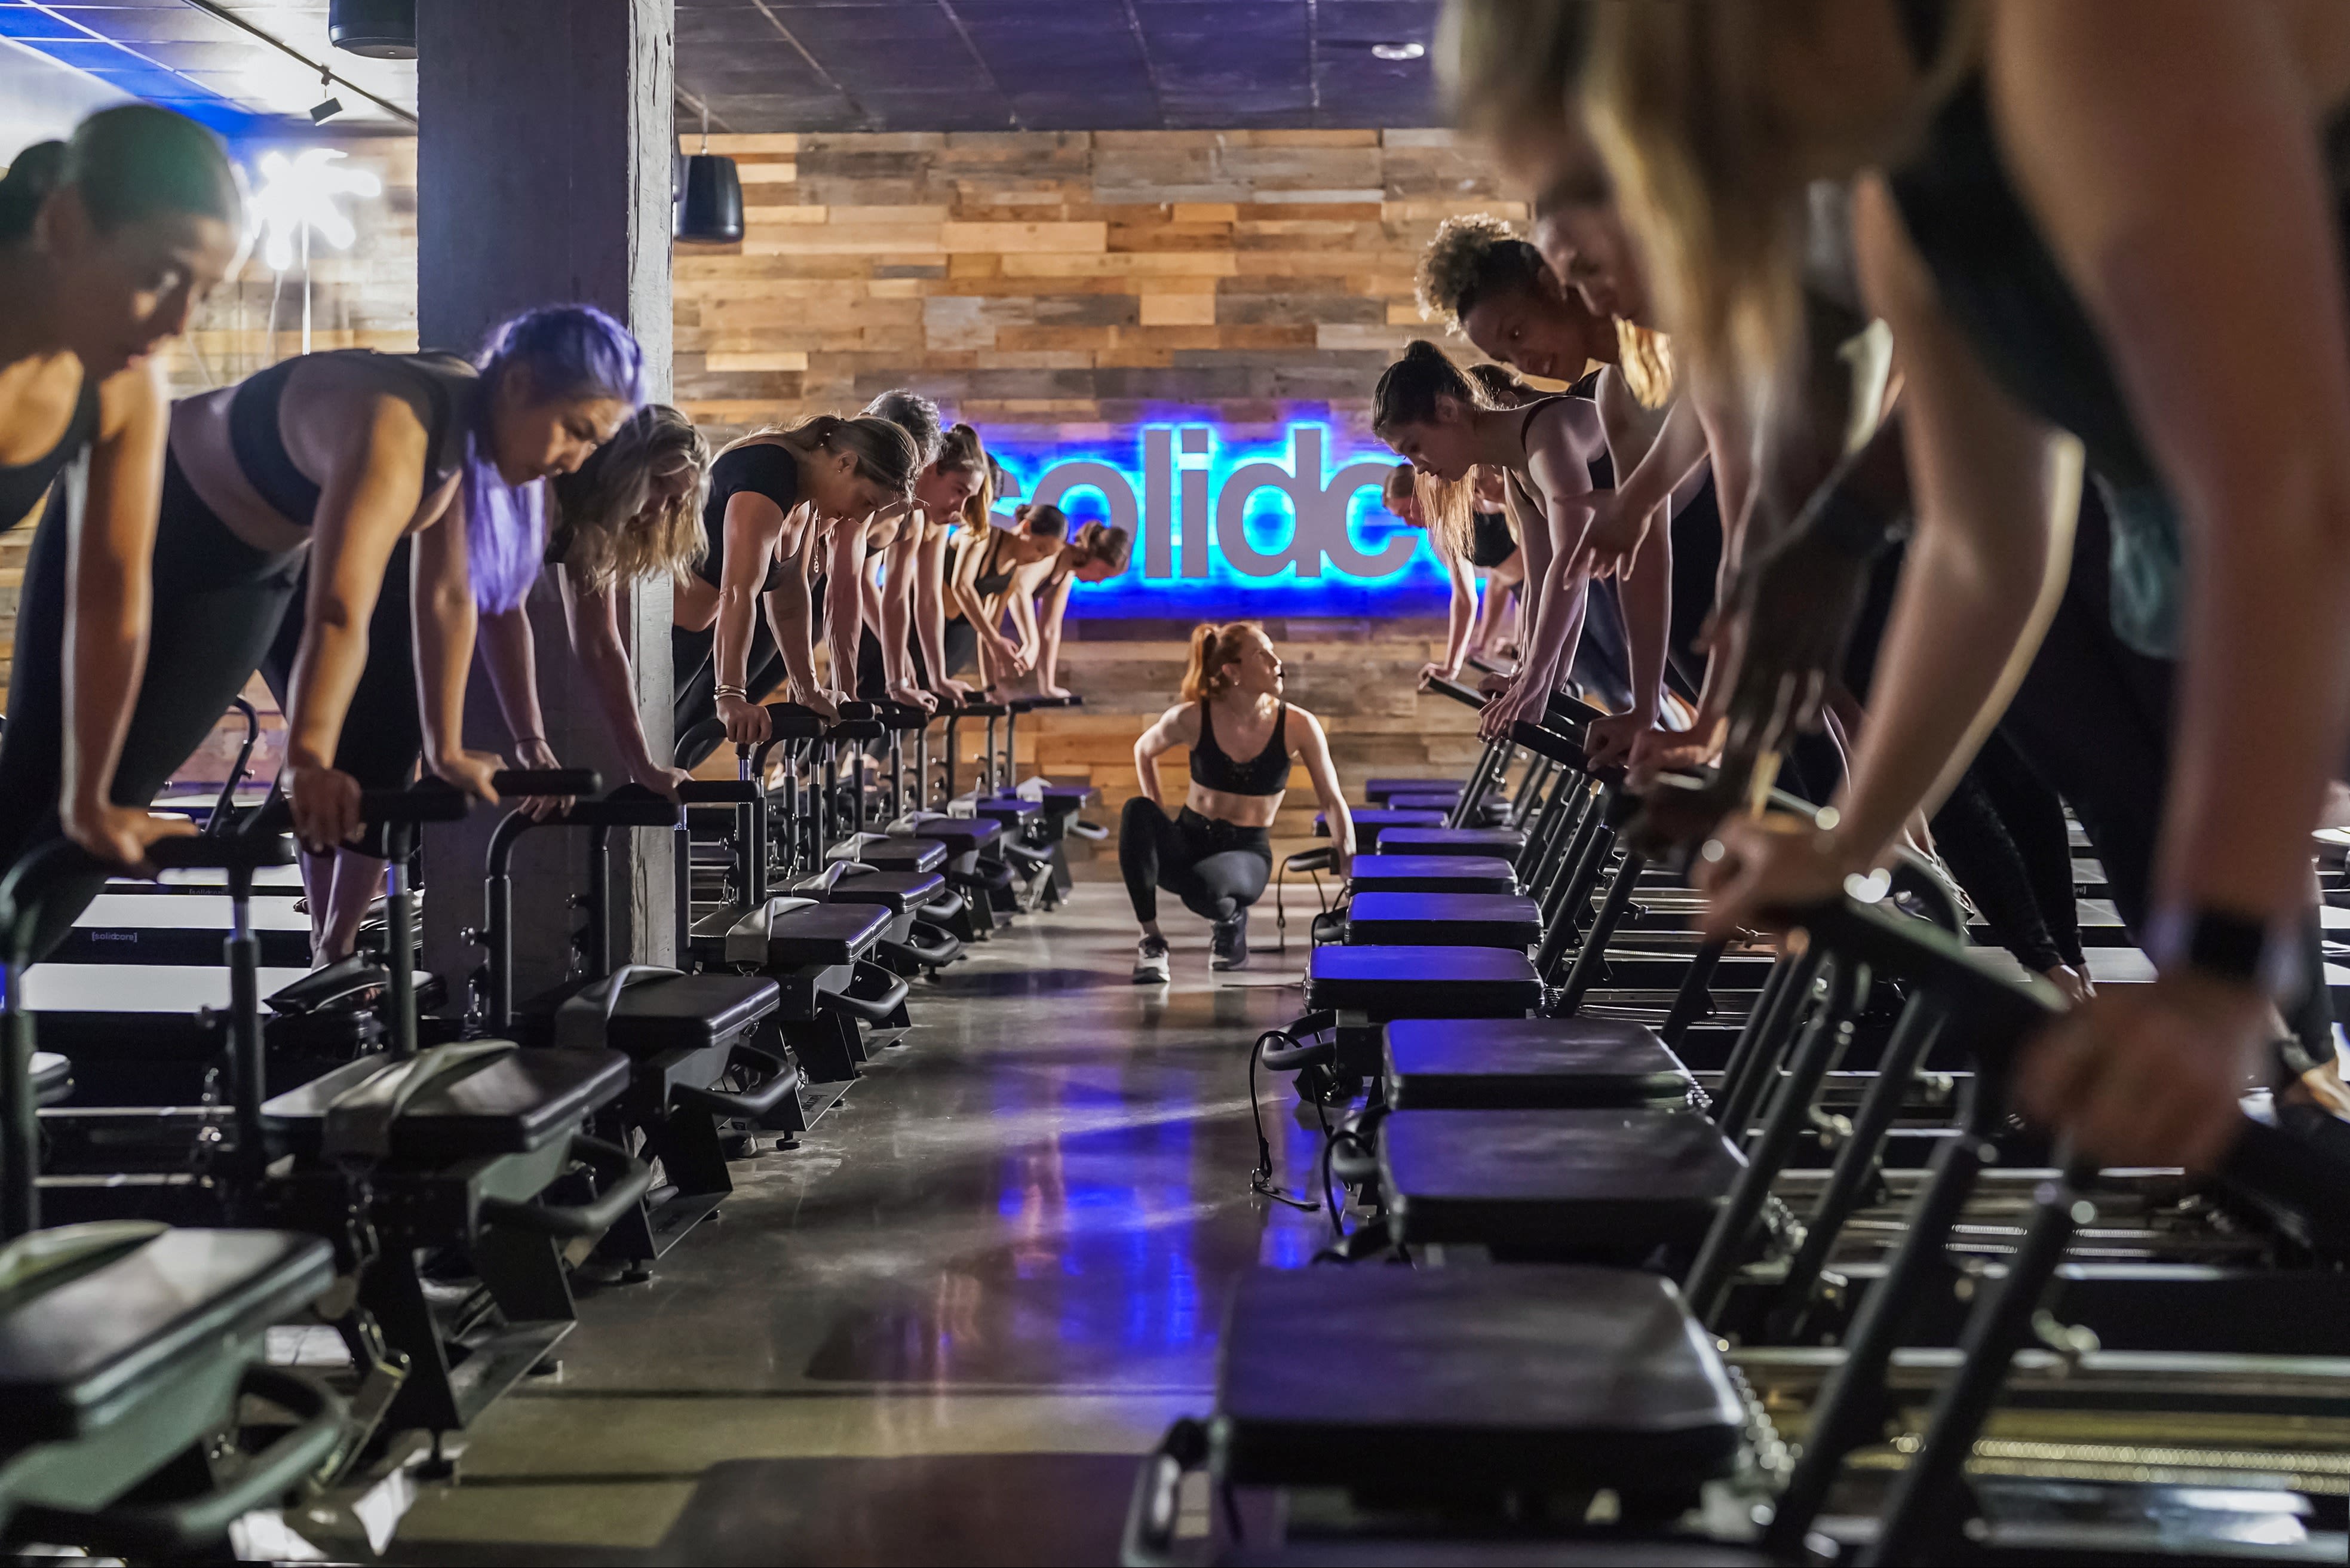 solidcore] - Queen Anne: Read Reviews and Book Classes on ClassPass